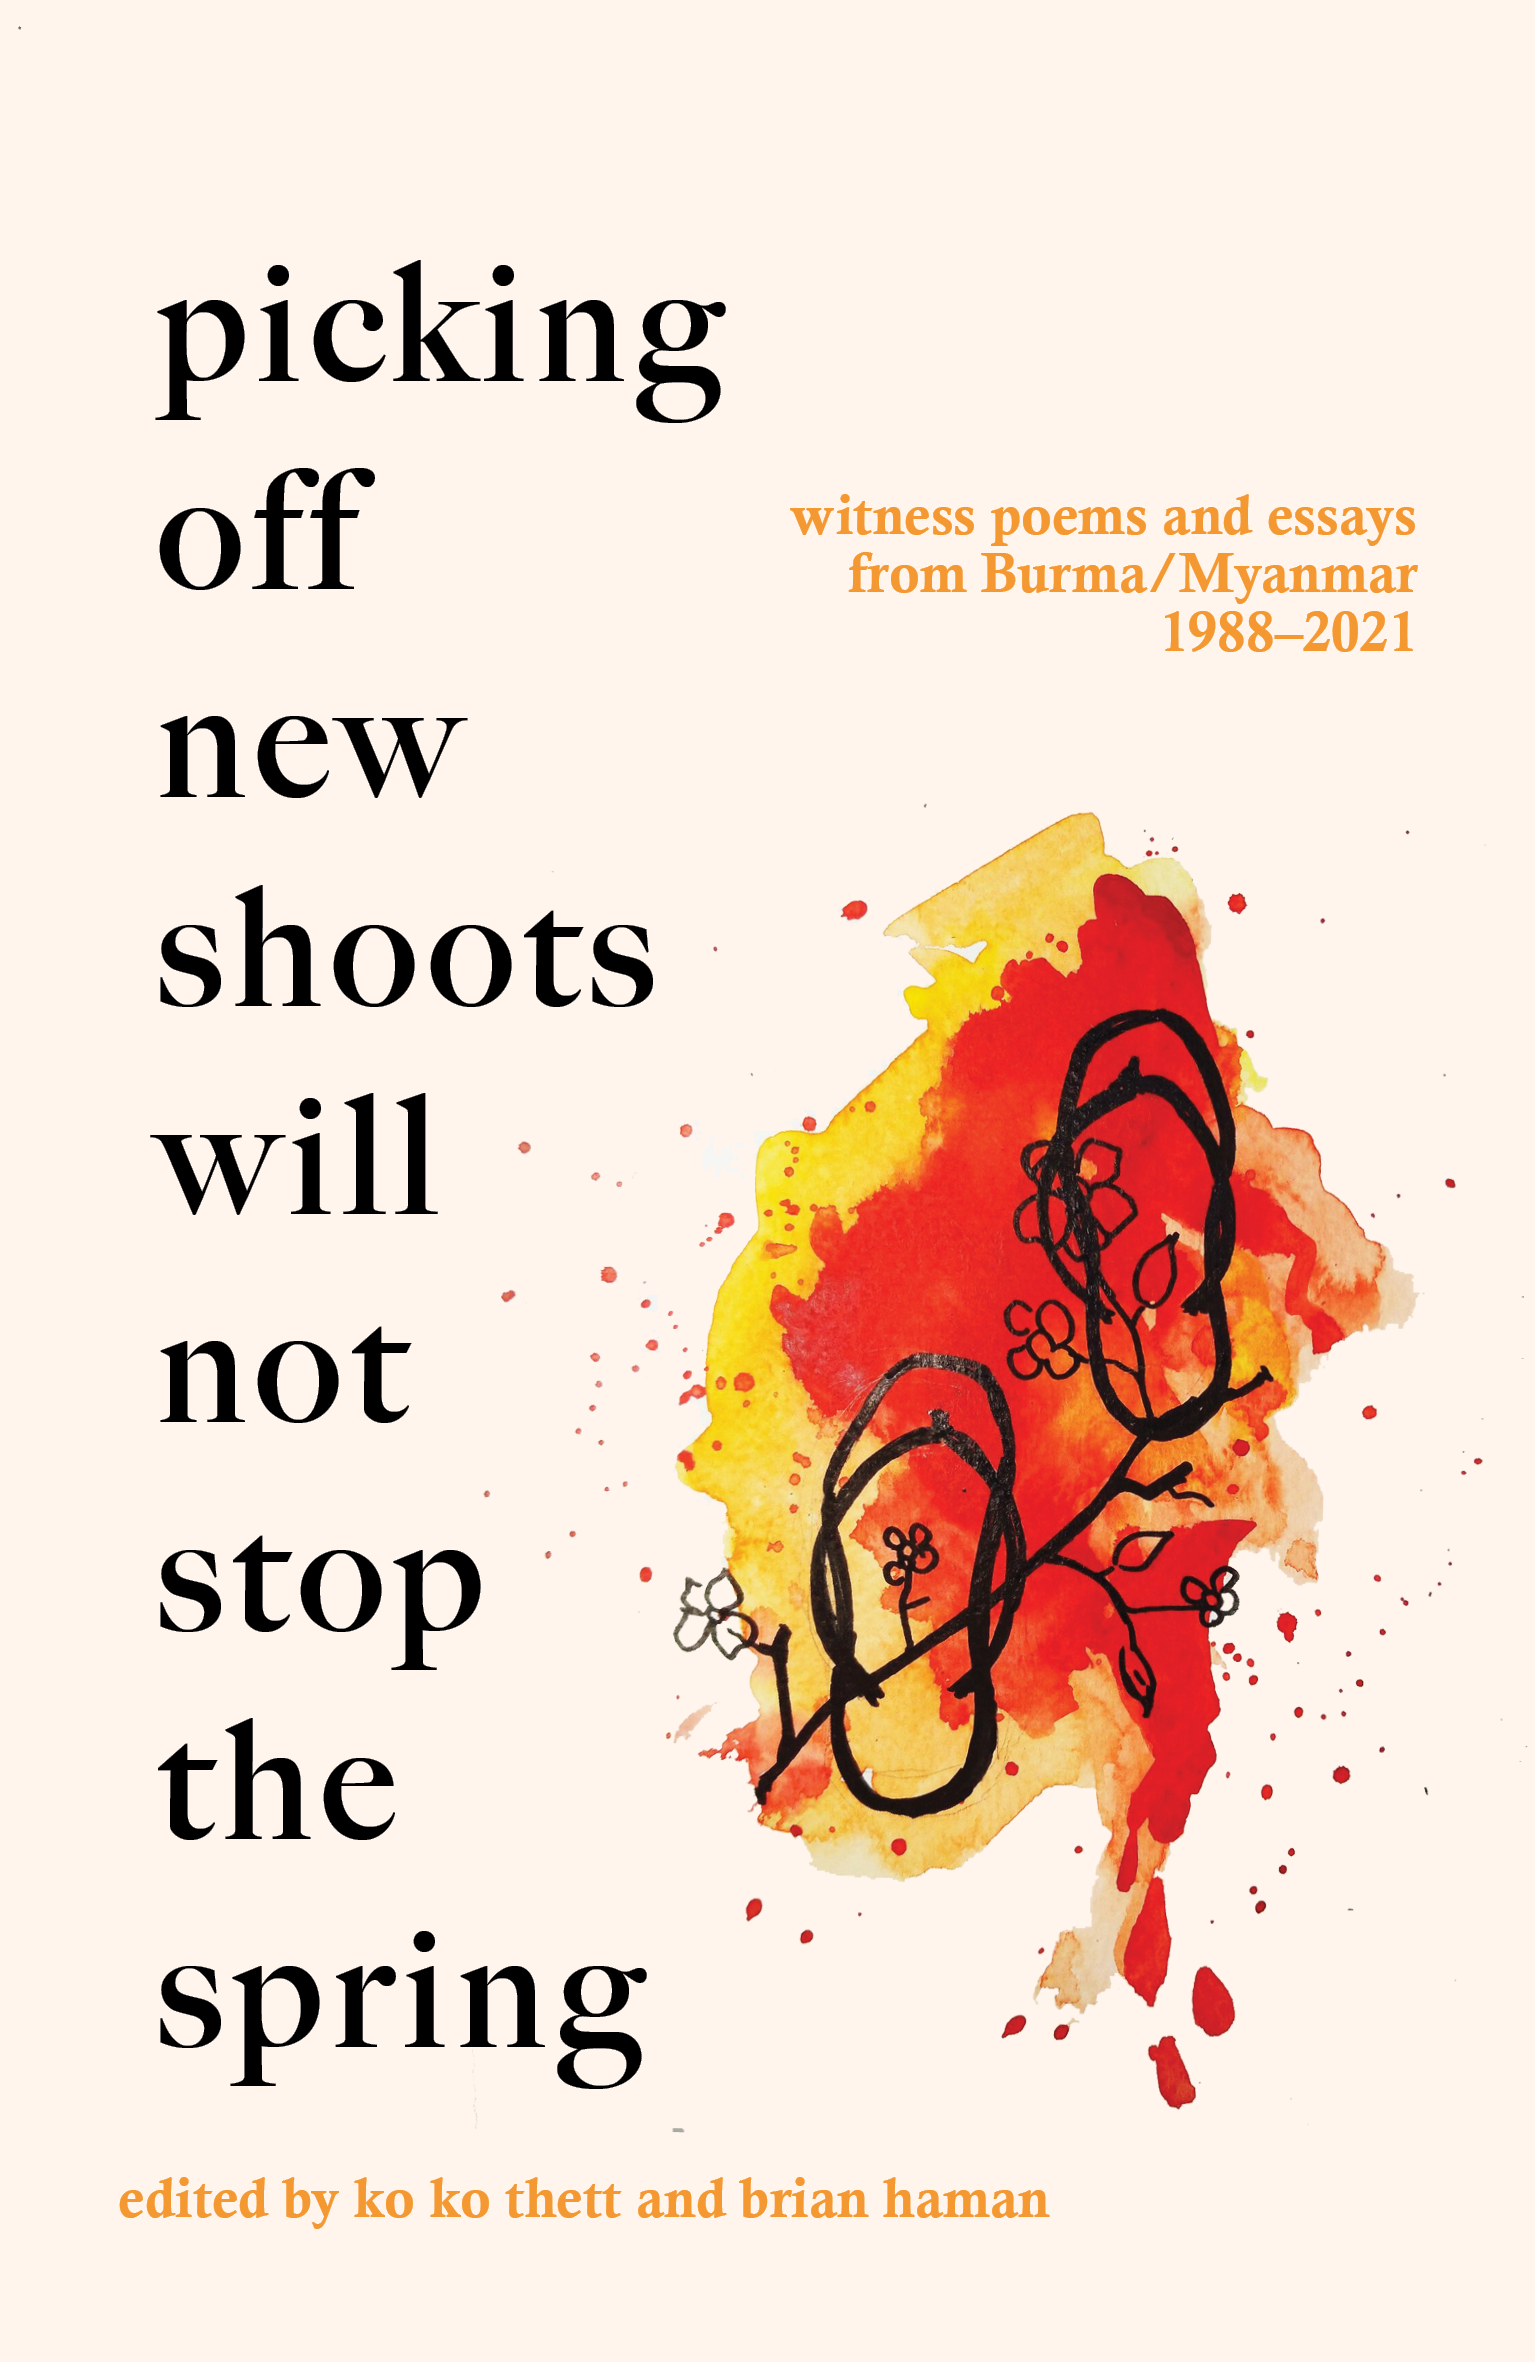 Poetry - New American Poets of The 90s - Text PDF, PDF